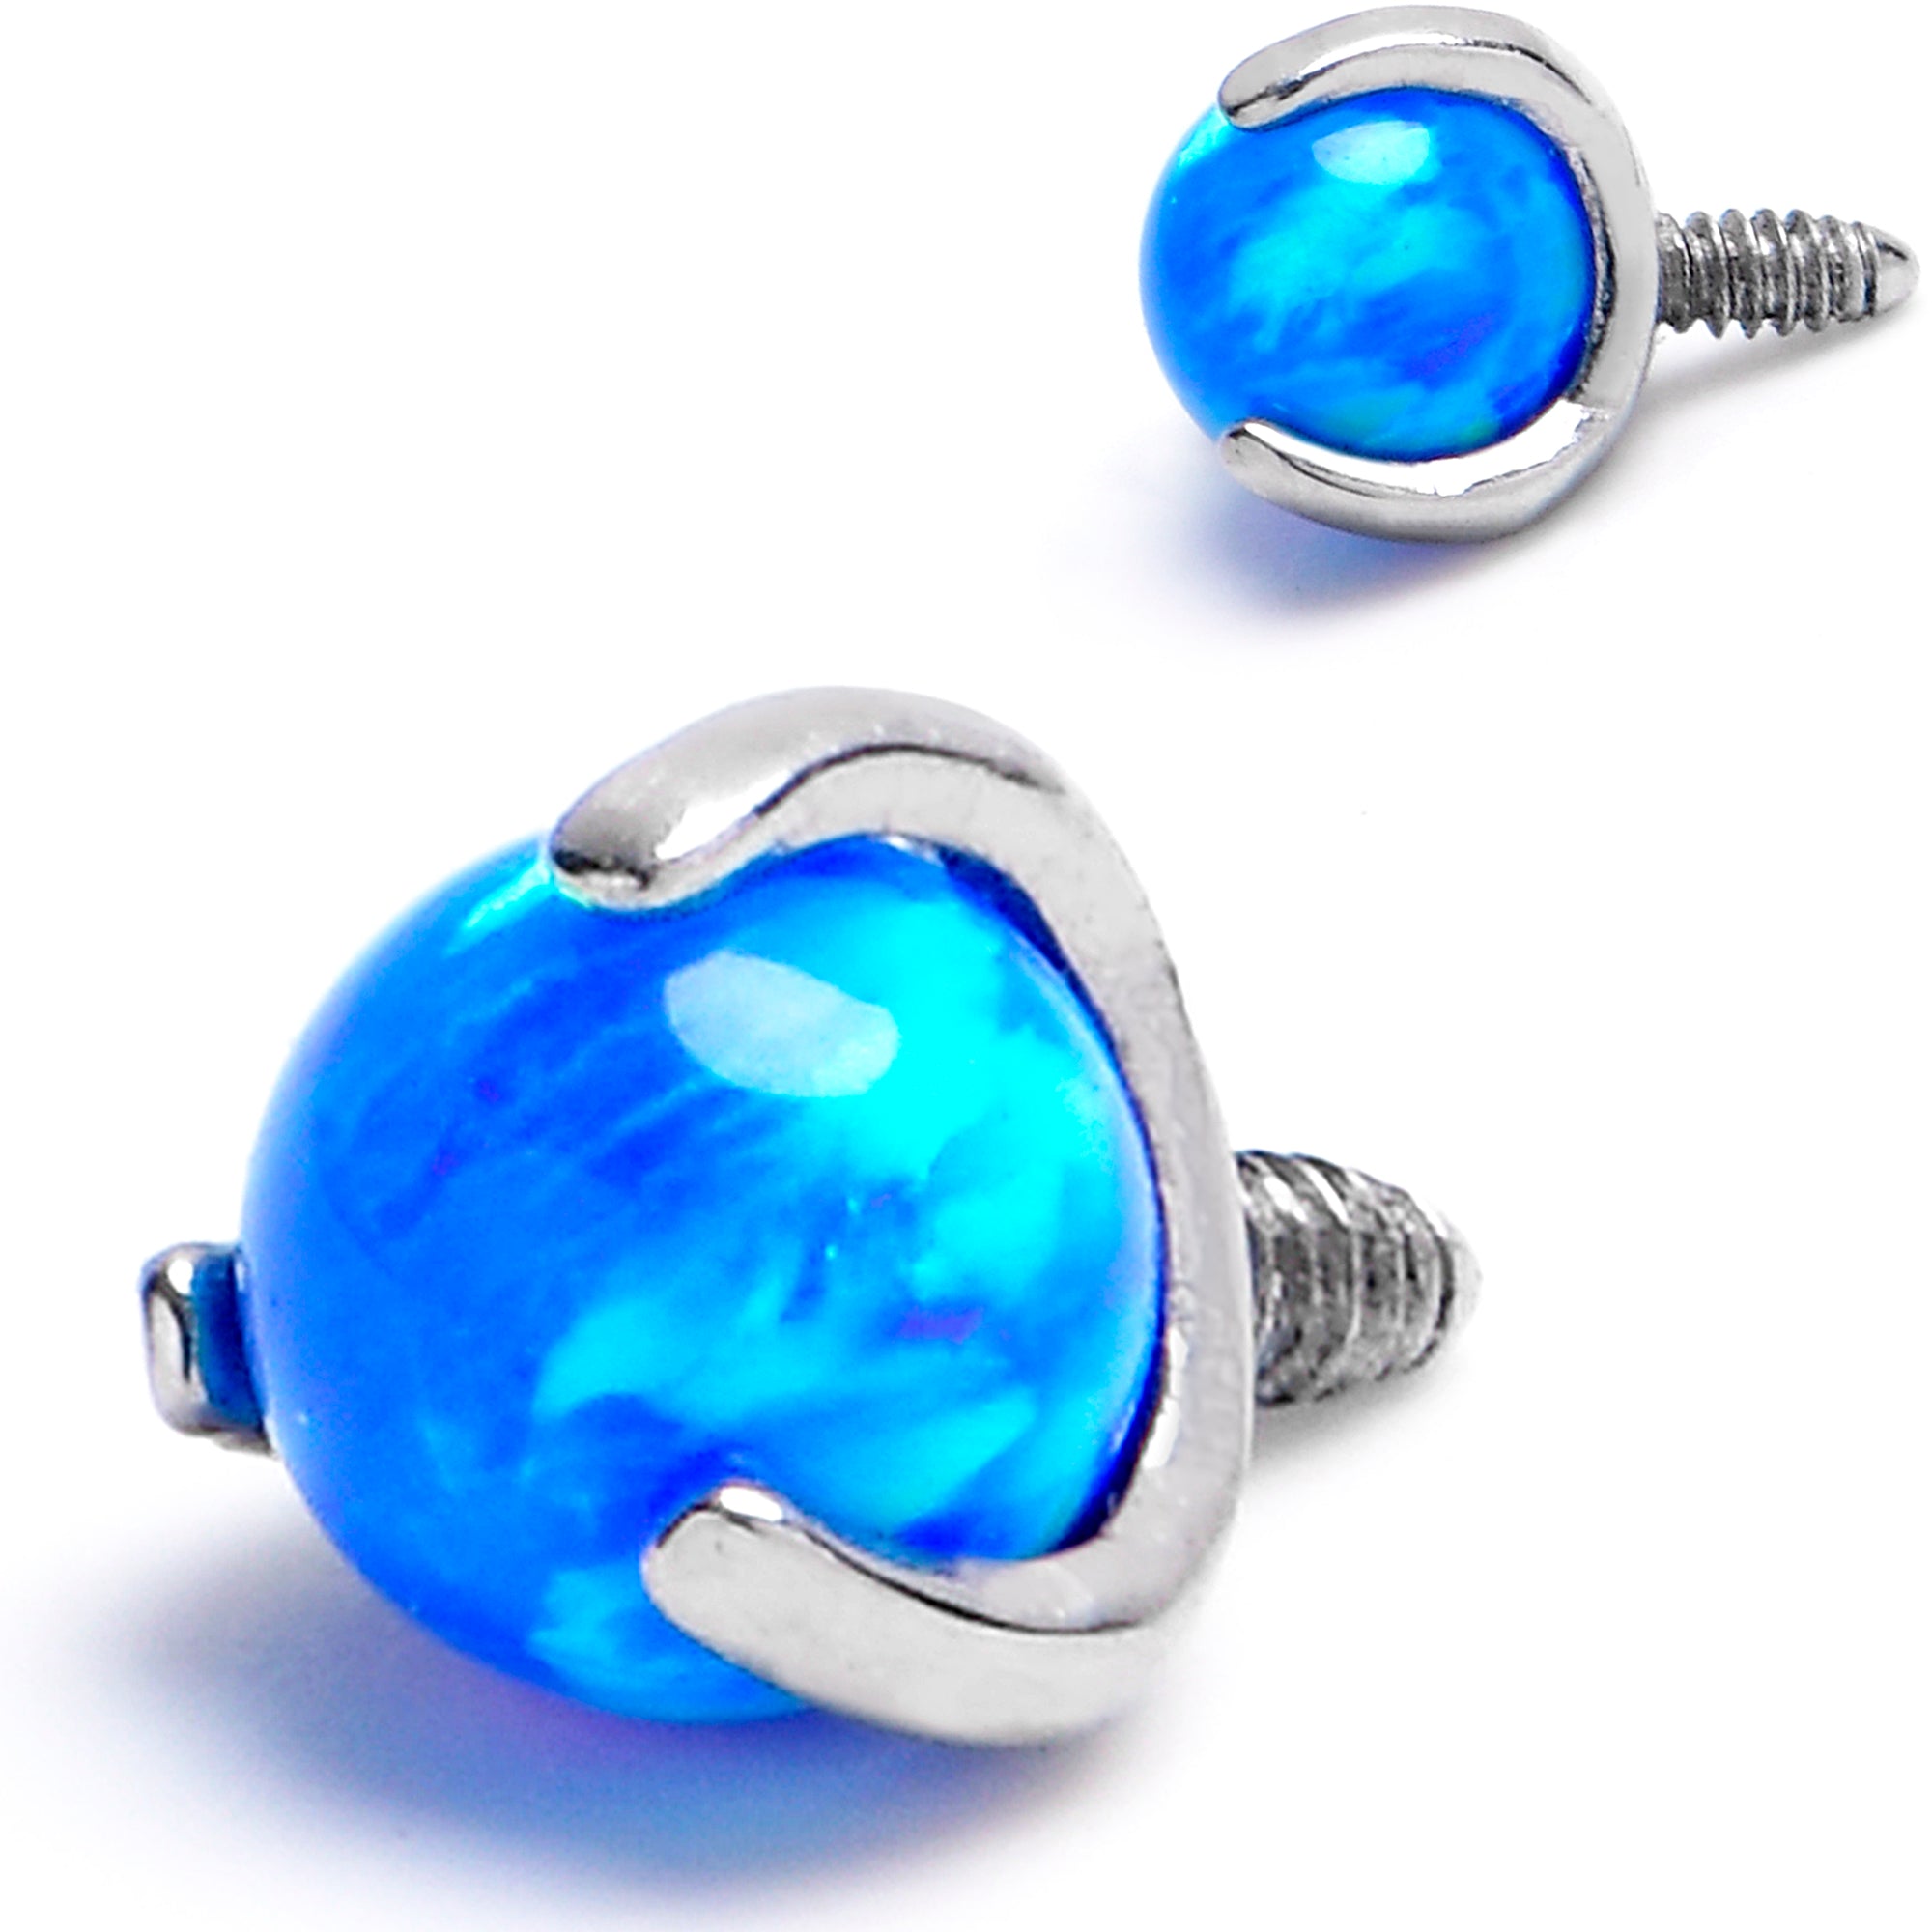 16 Gauge 3mm Blue Synthetic Opal Internally Threaded Replacement Ball